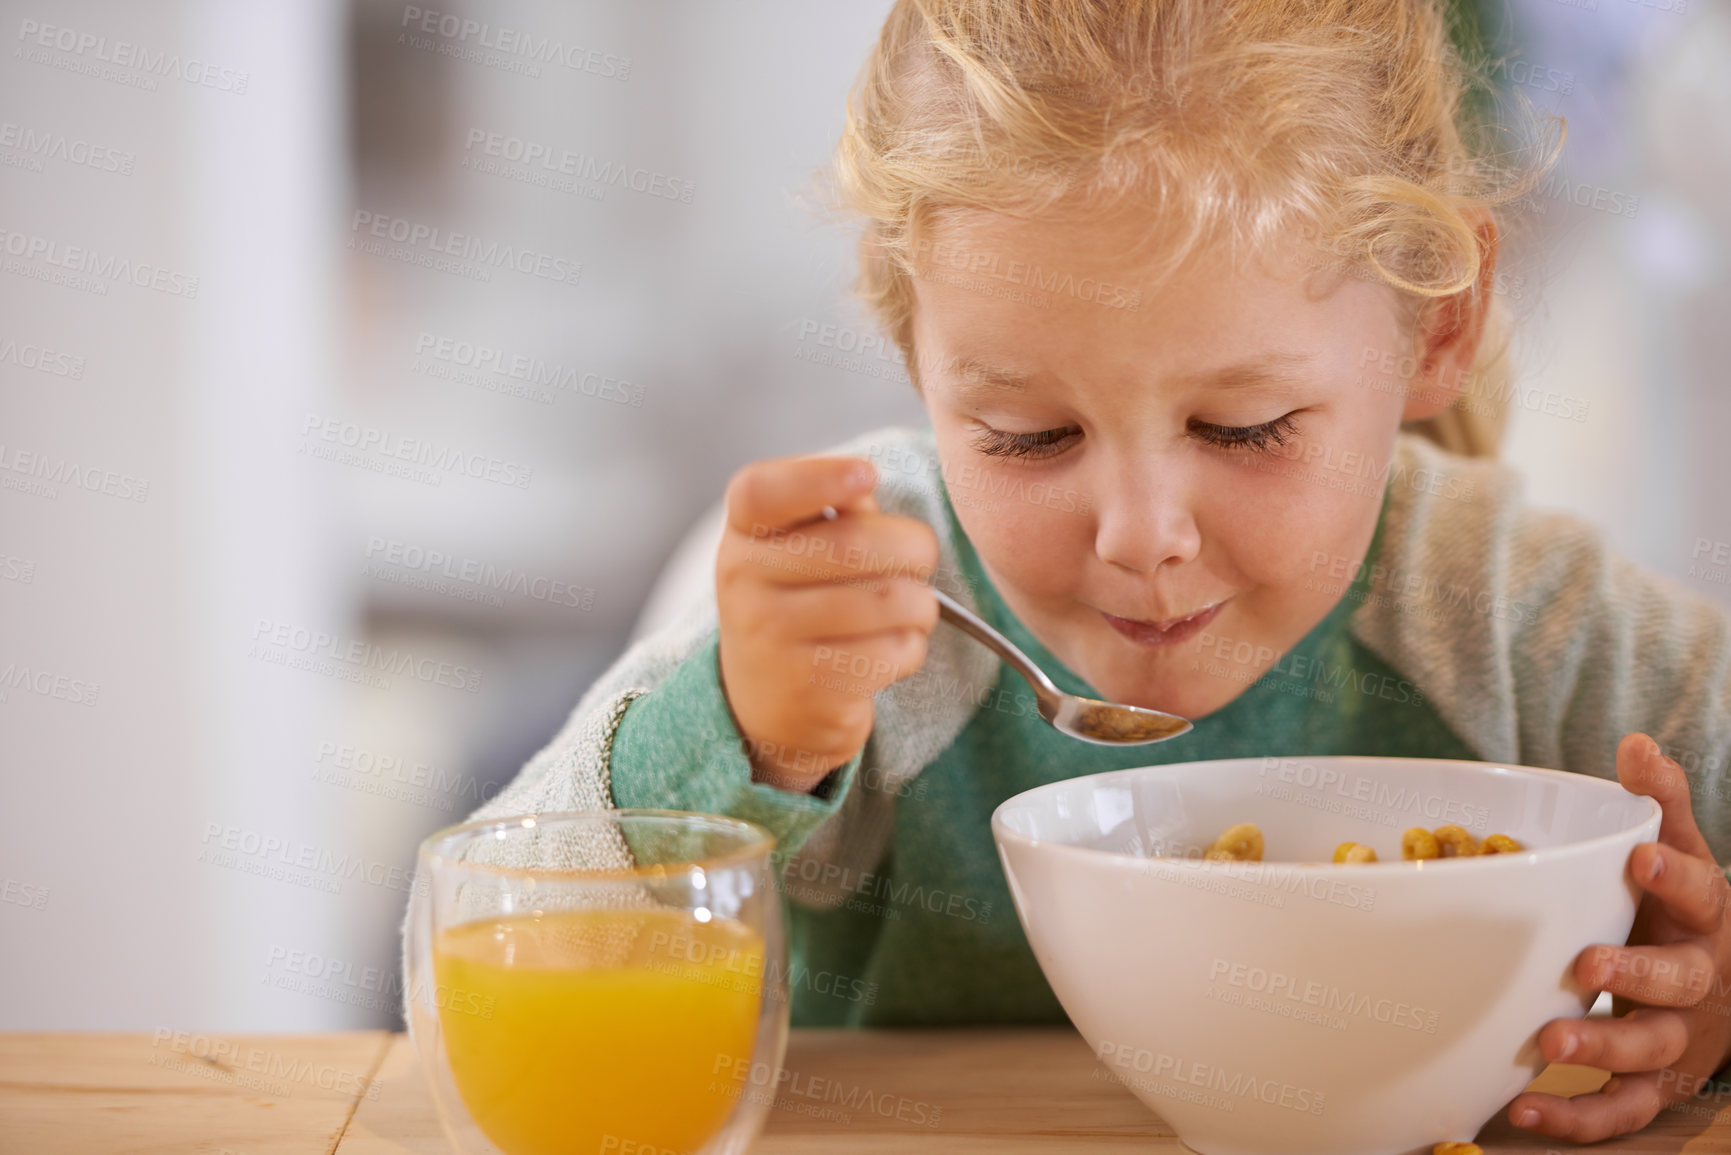 Buy stock photo Home, eating and cereal with girl or child, happy morning and nutrition with table. Breakfast, glass or orange juice for vitamins, fibre for toddler and healthy development of growing kid in house